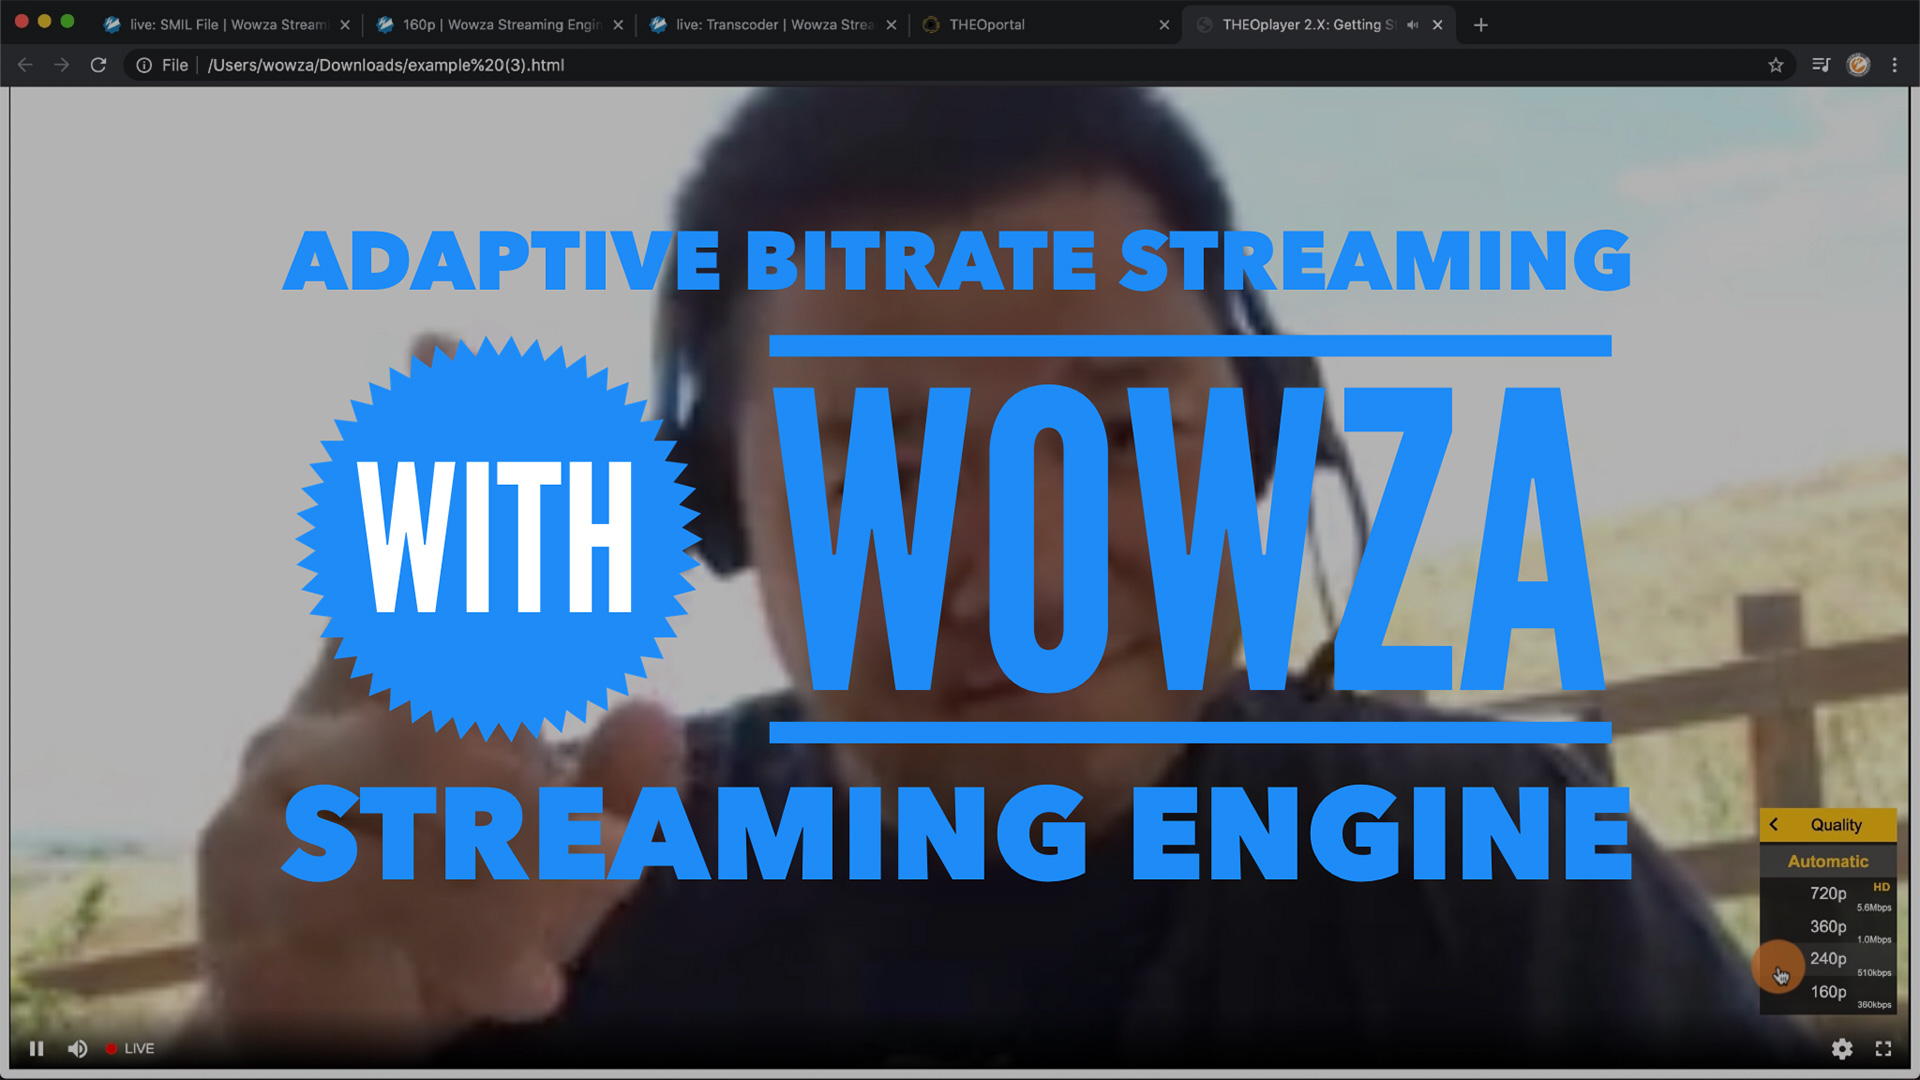 Enable or disable stream optimizations (adaptive bitrate, DVR pre-roll, etc.)
Click "Save" to save the stream options